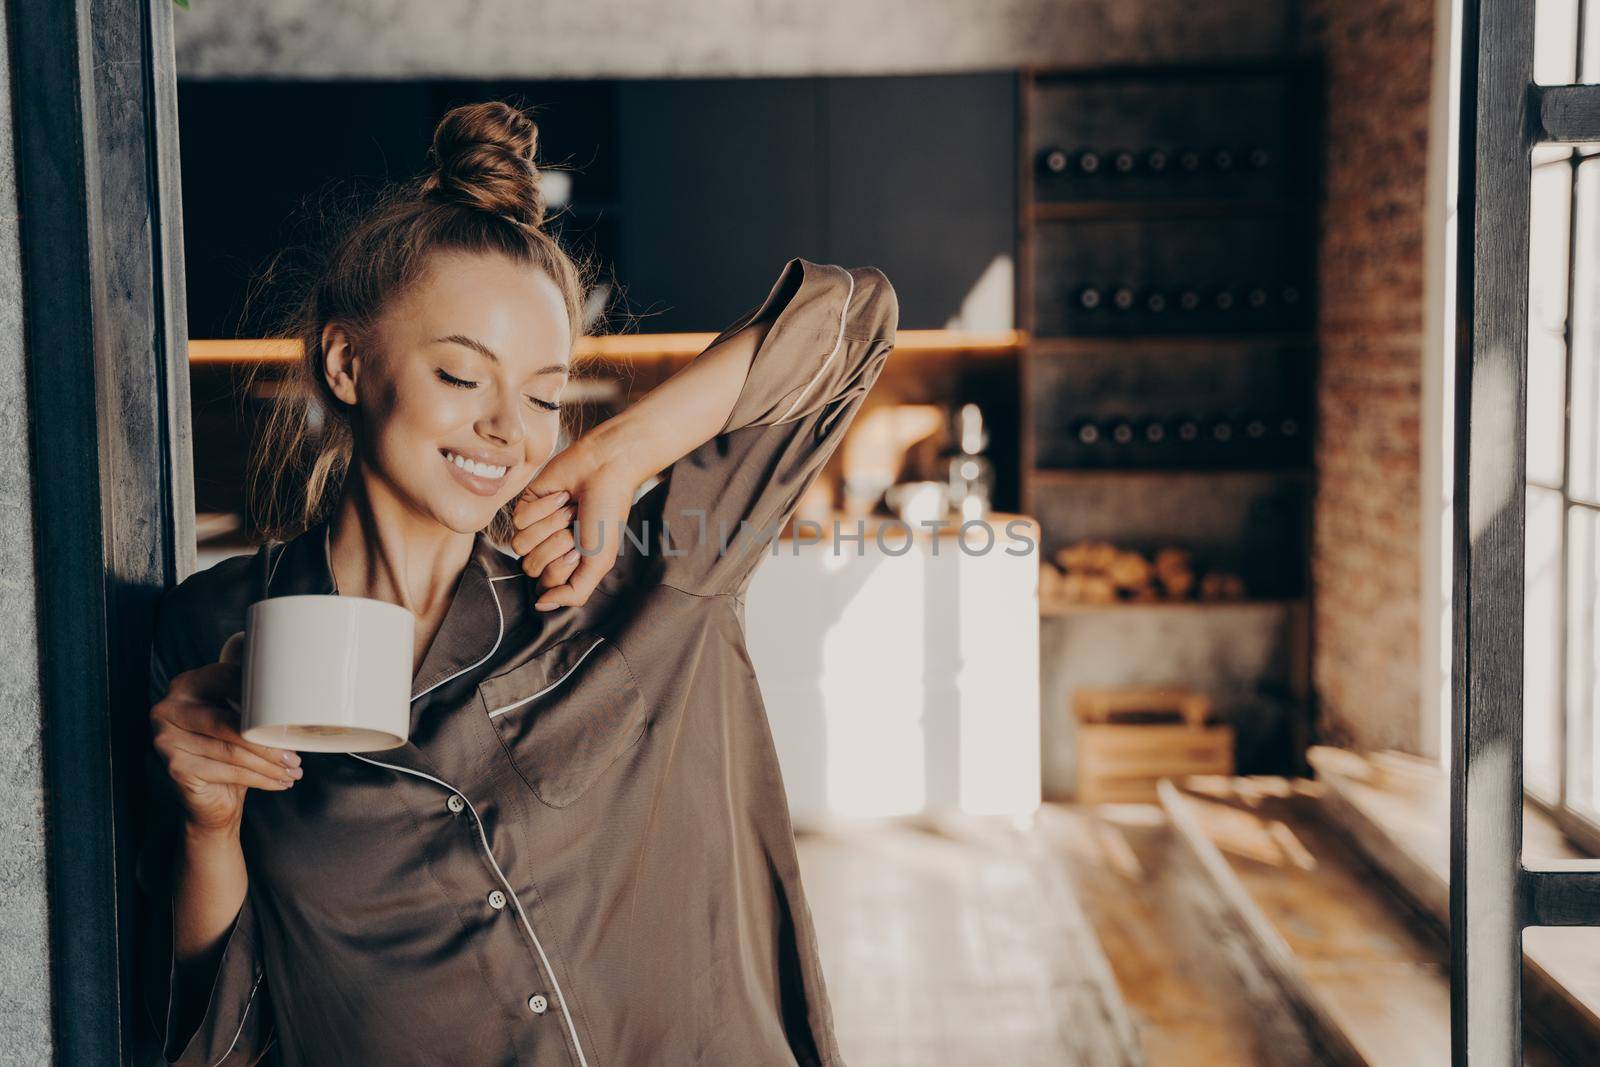 New day. Happy beautiful brunette female stretching with cup of coffee in her hand enjoying morning sunshine while standing in kitchen doorway in satin pajama. People and lifestyle concept